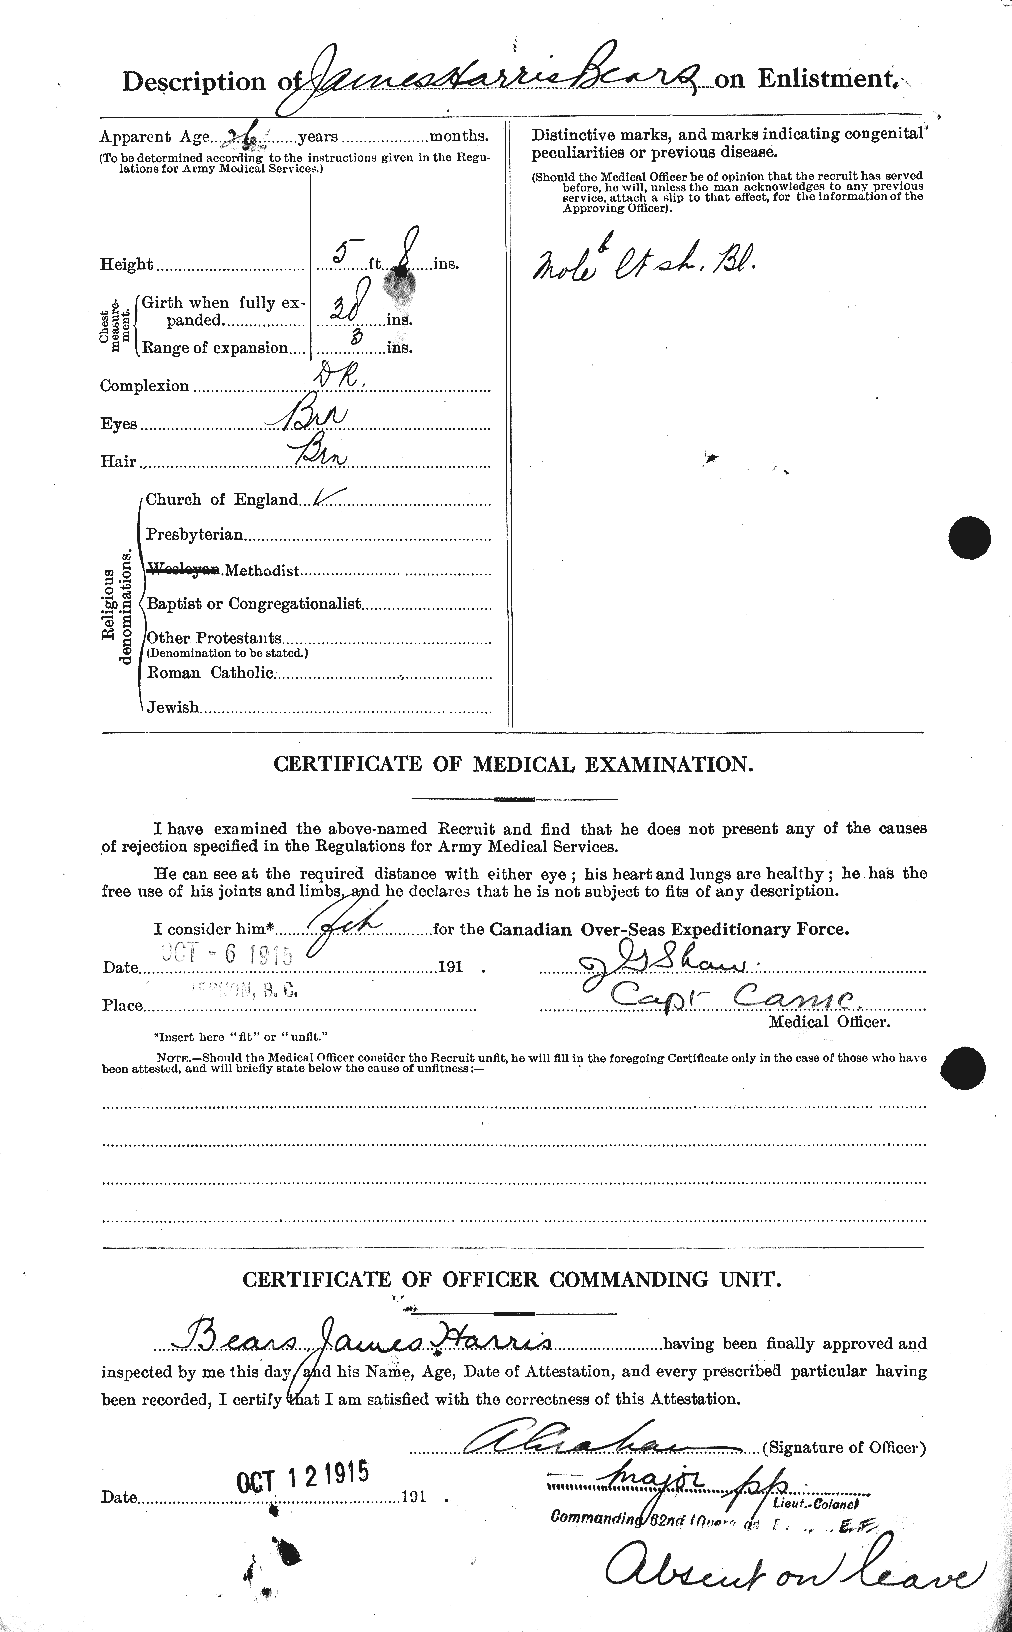 Personnel Records of the First World War - CEF 230386b